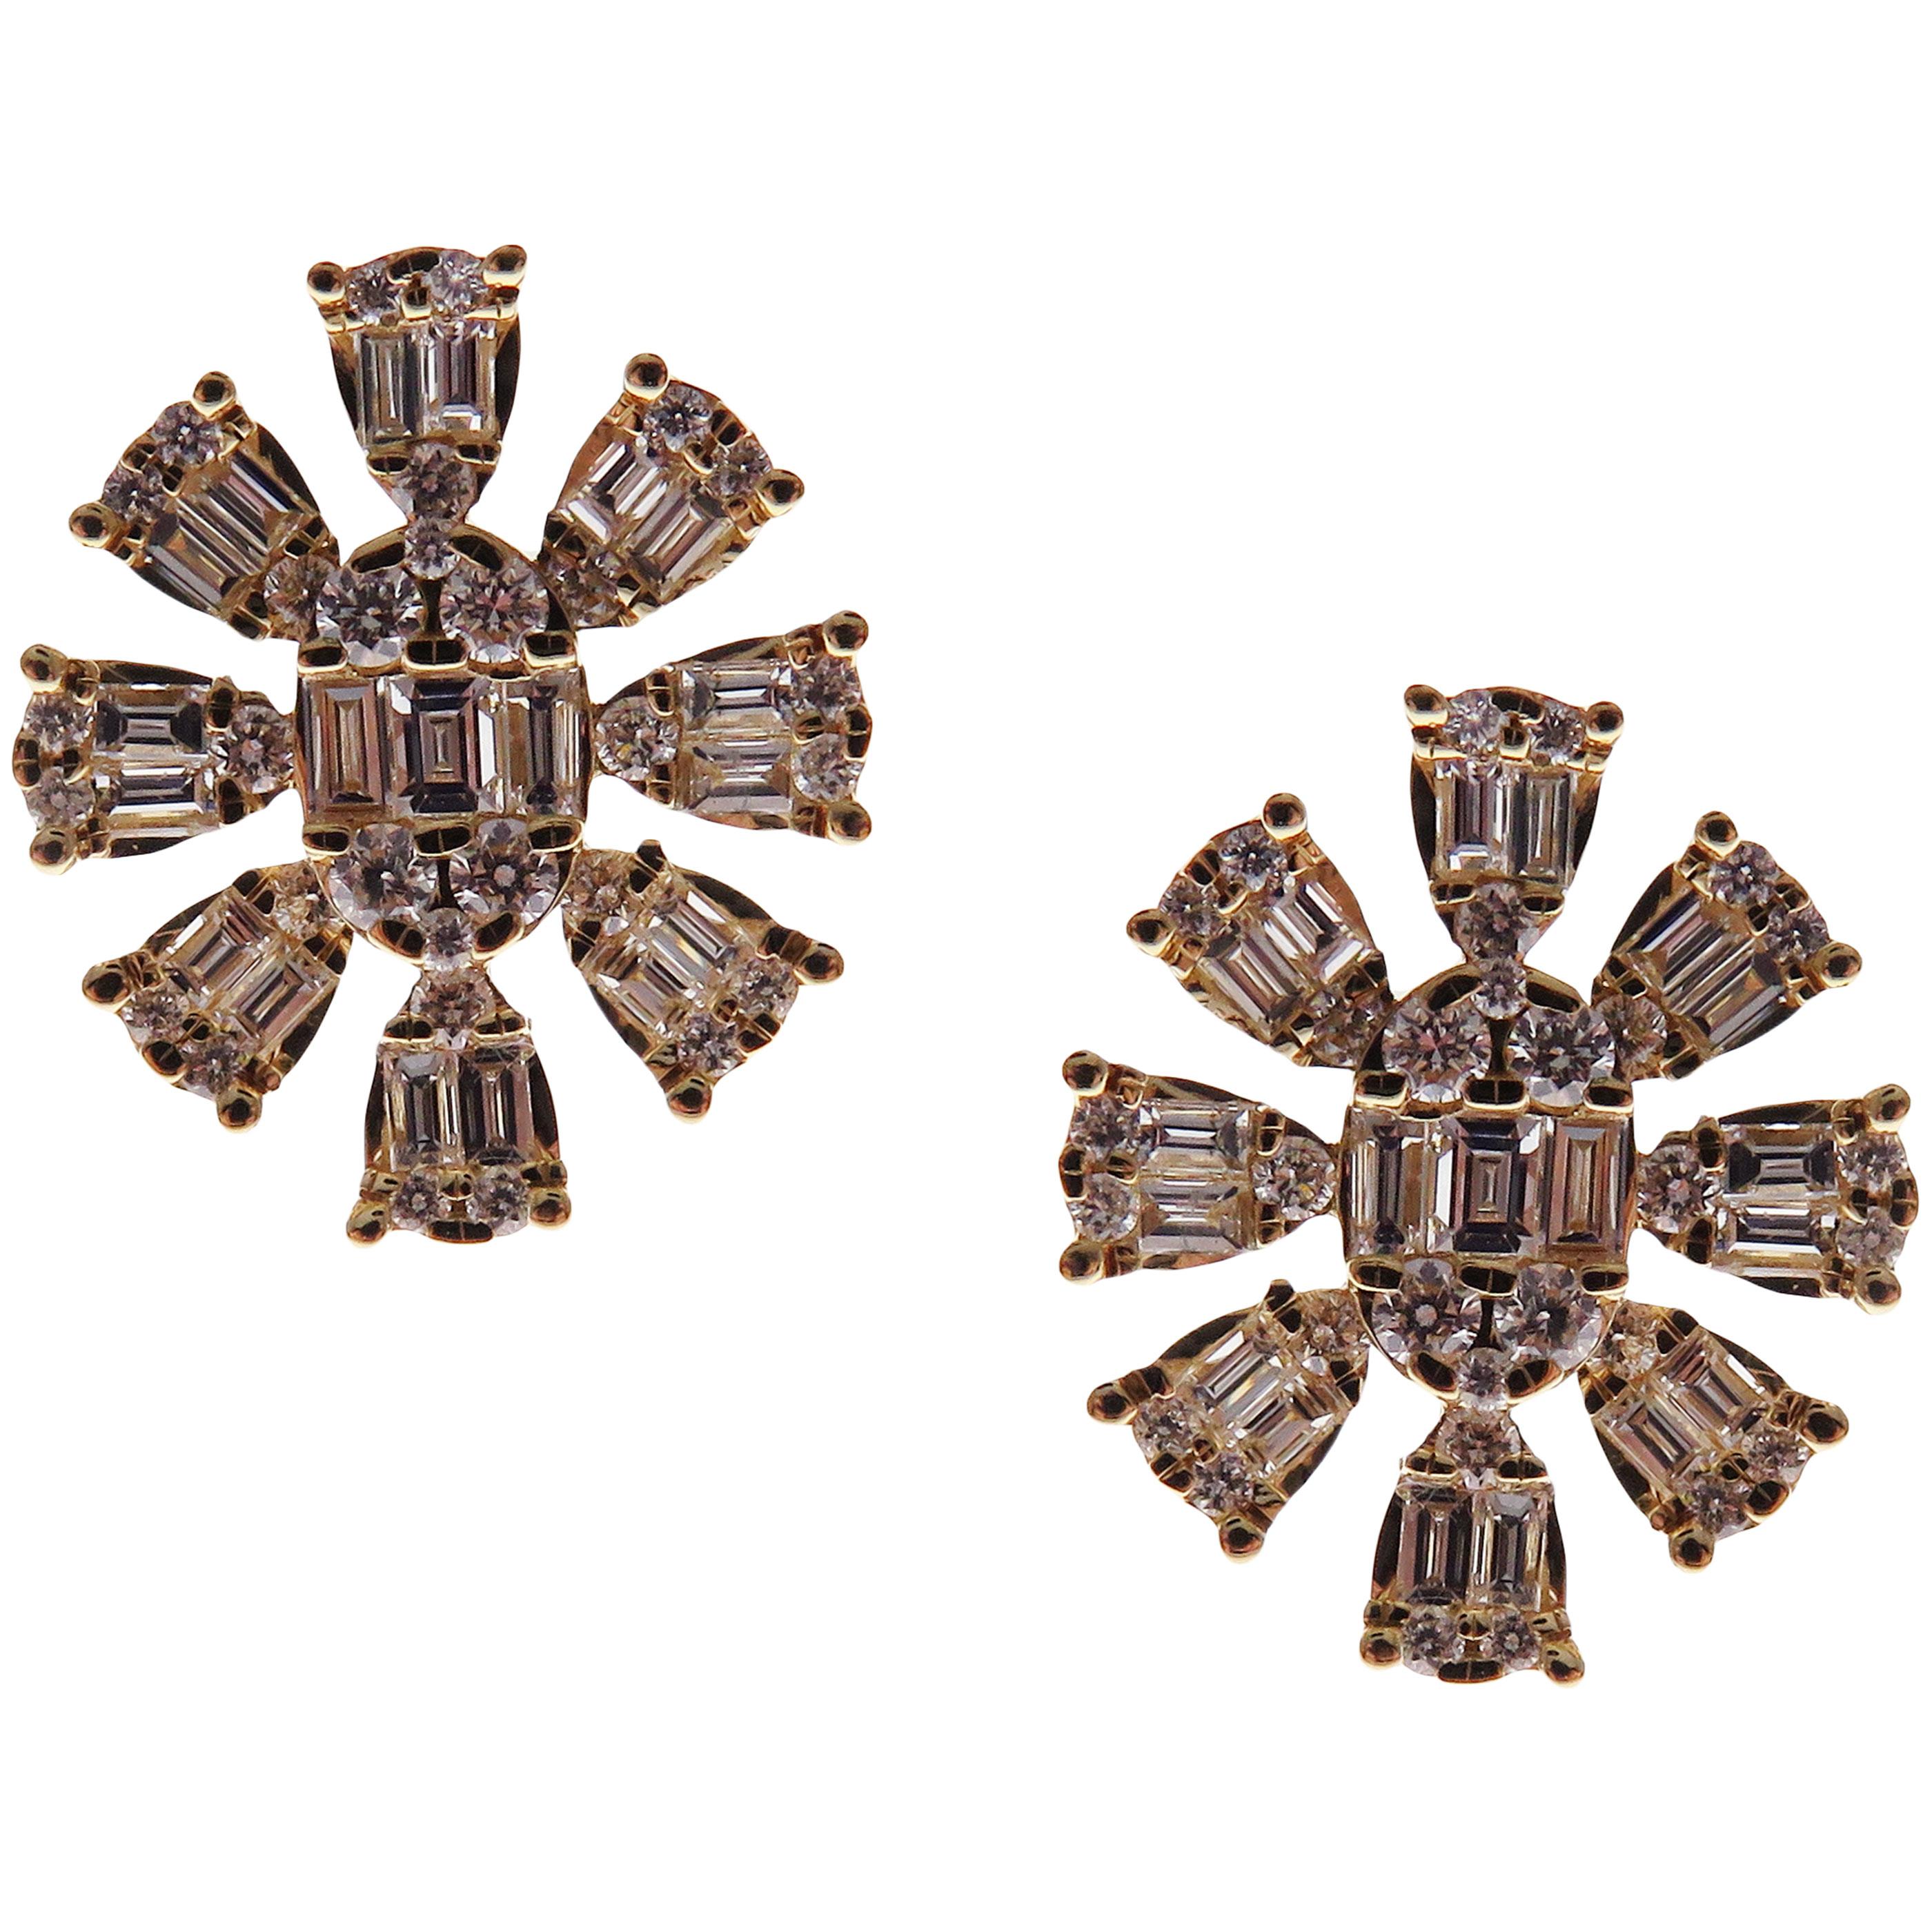 These trendy snowflake inspired stud earrings with round and baguette white diamonds are crafted in 18-karat yellow gold, featuring 60 round white diamonds totaling of 0.38 carats and 38 baguette white diamonds totaling of 0.60 carats.
These